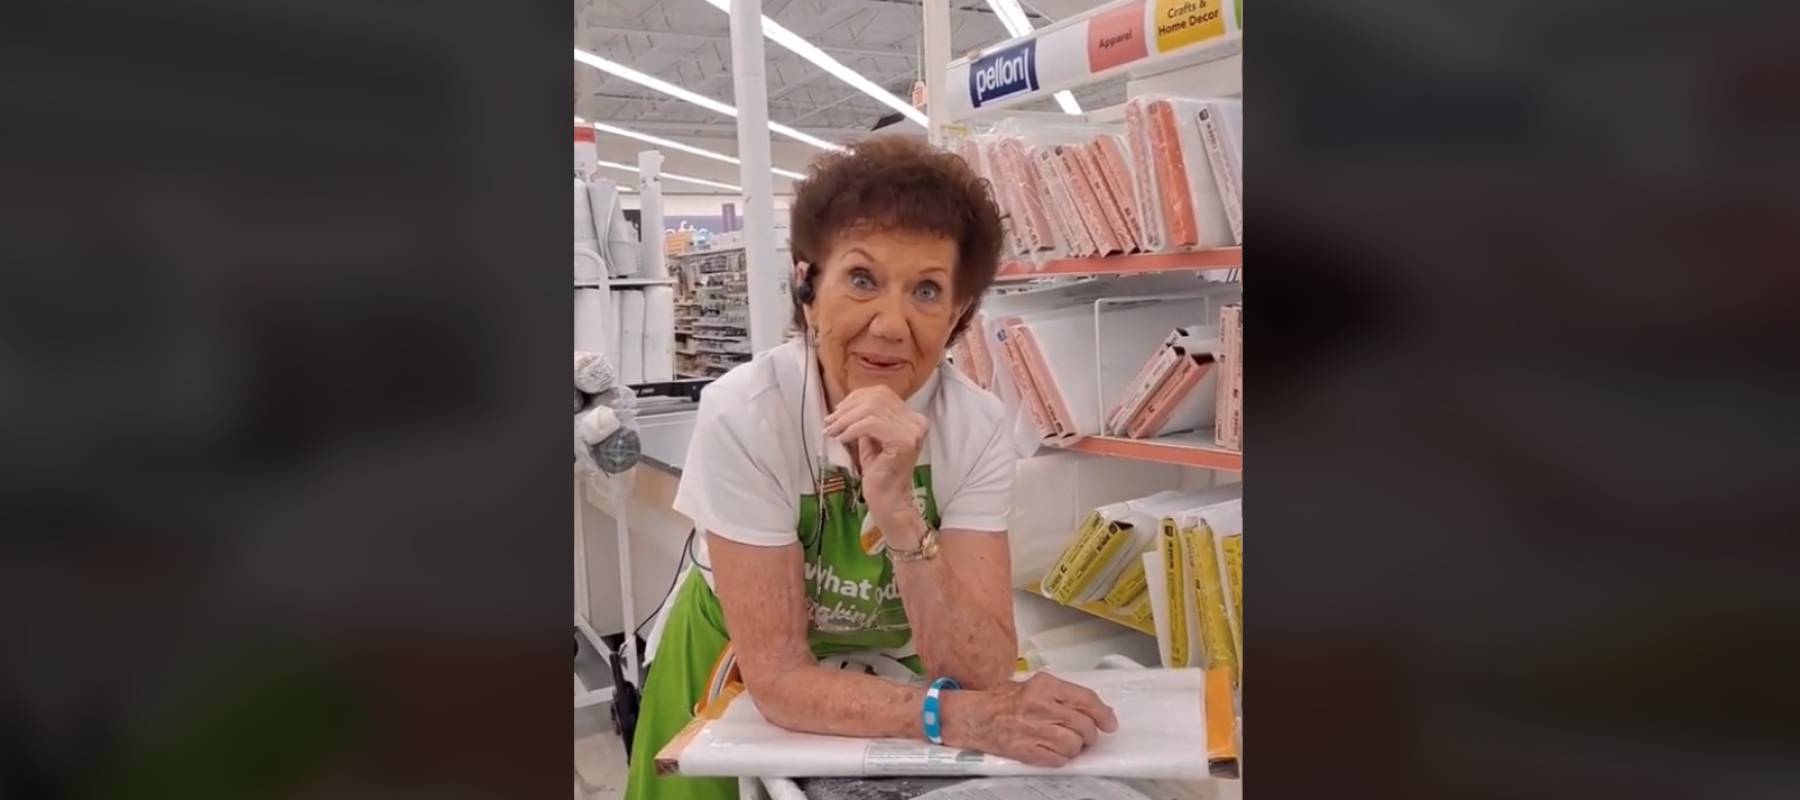 Older woman seen wearing Joann&#039;s Fabrics apron and leaning on table in aisle of the store.